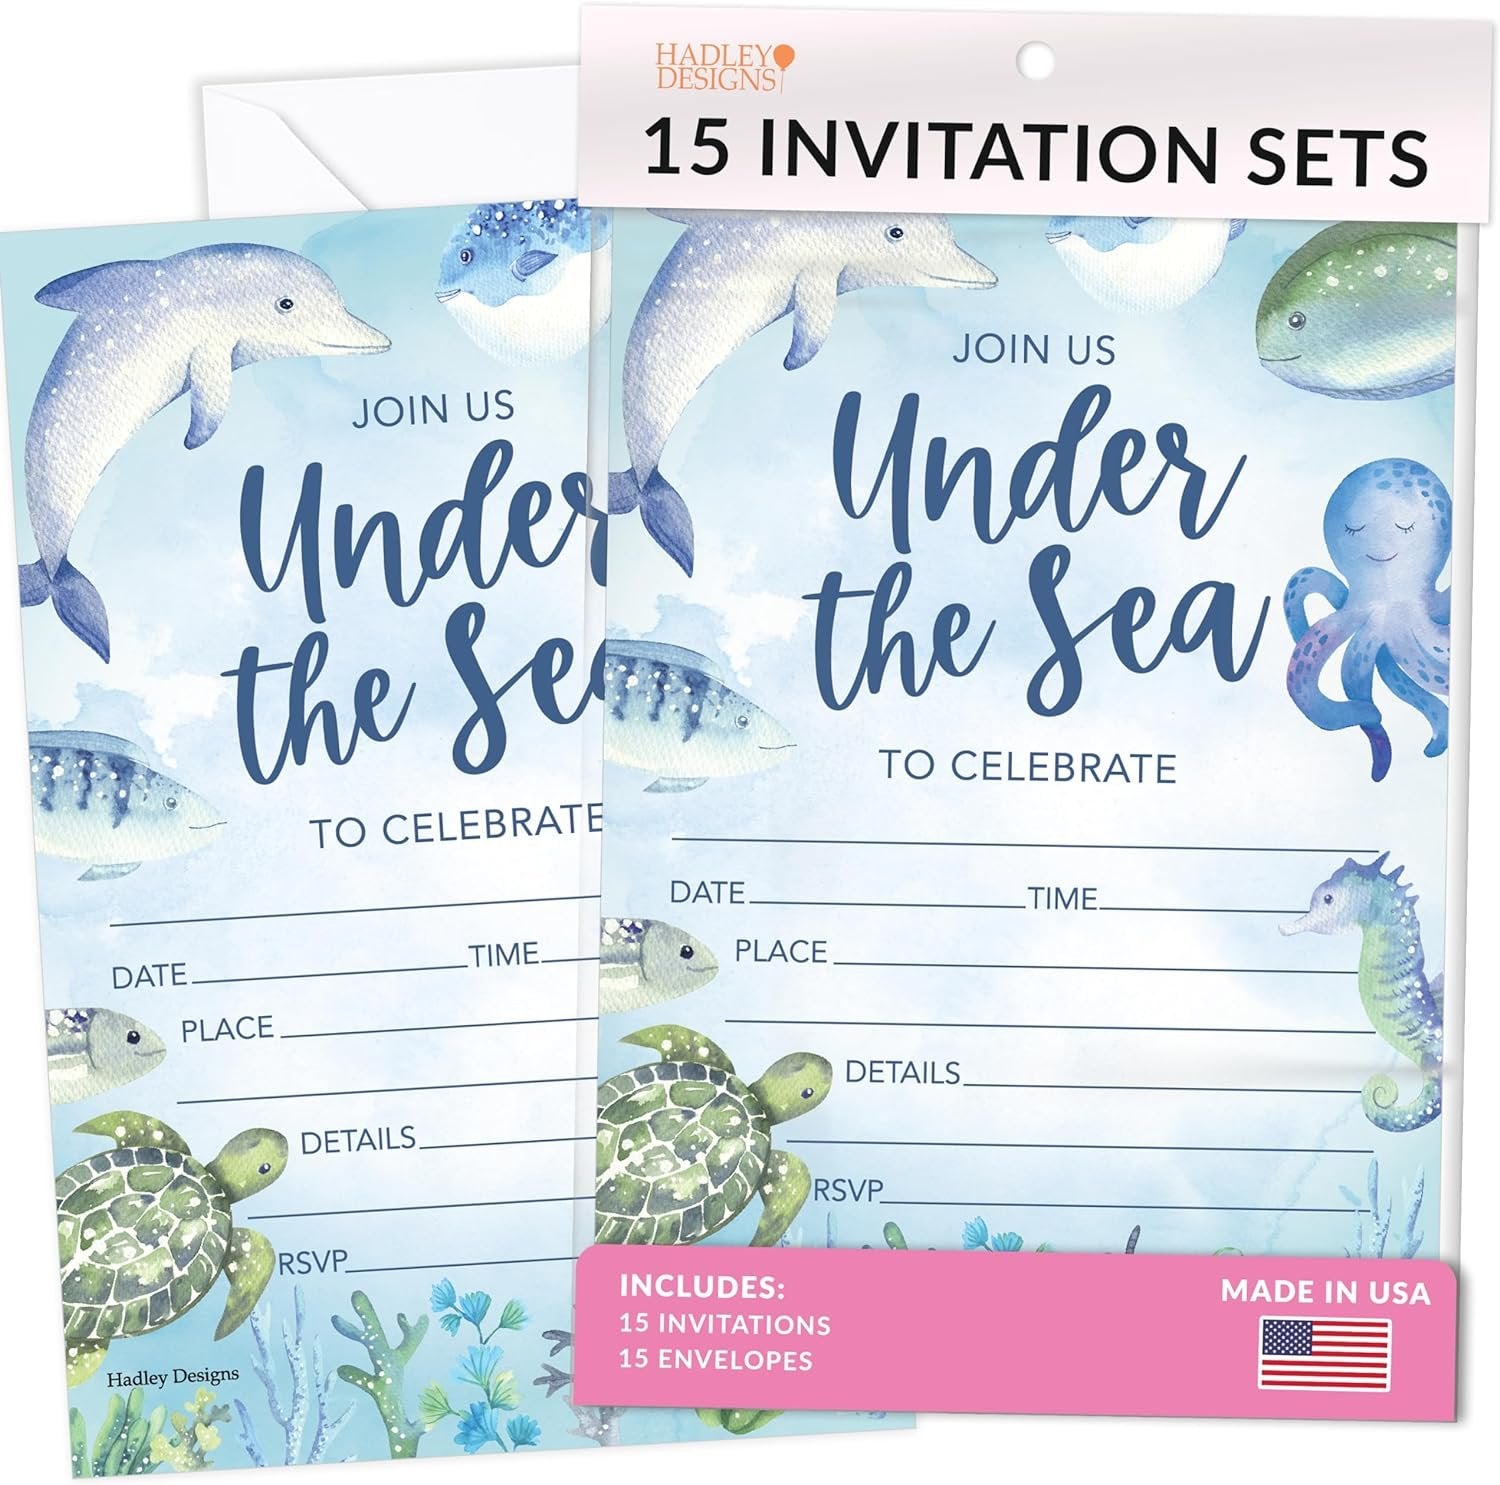 Kids Party Invitations Shop by Theme | Ocean